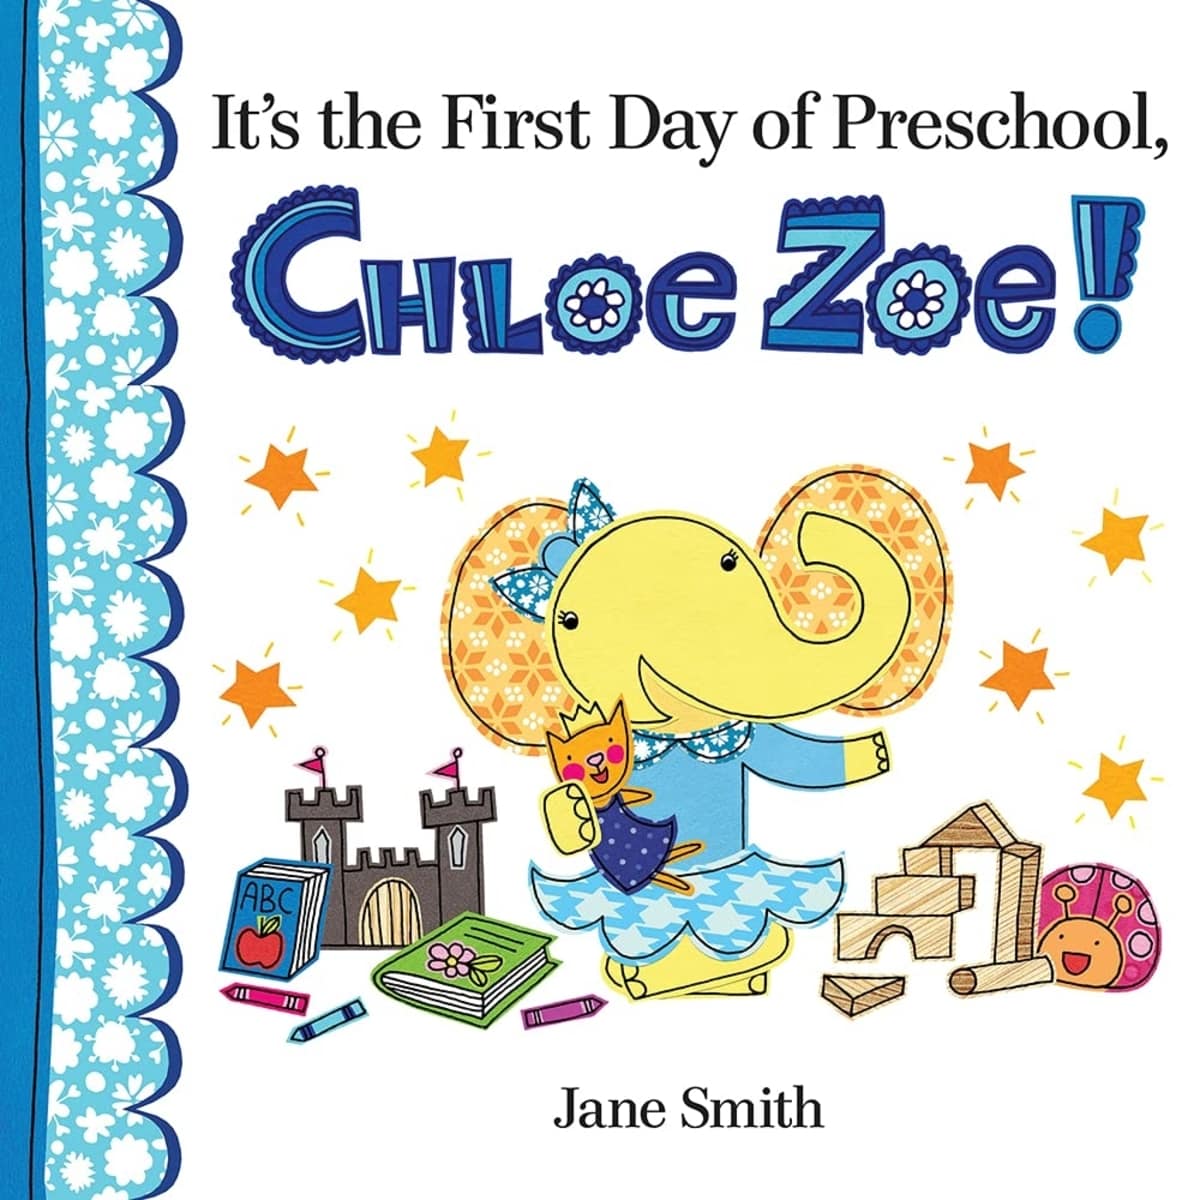 The book cover of "It's the First Day of School, Chloe Zoe."